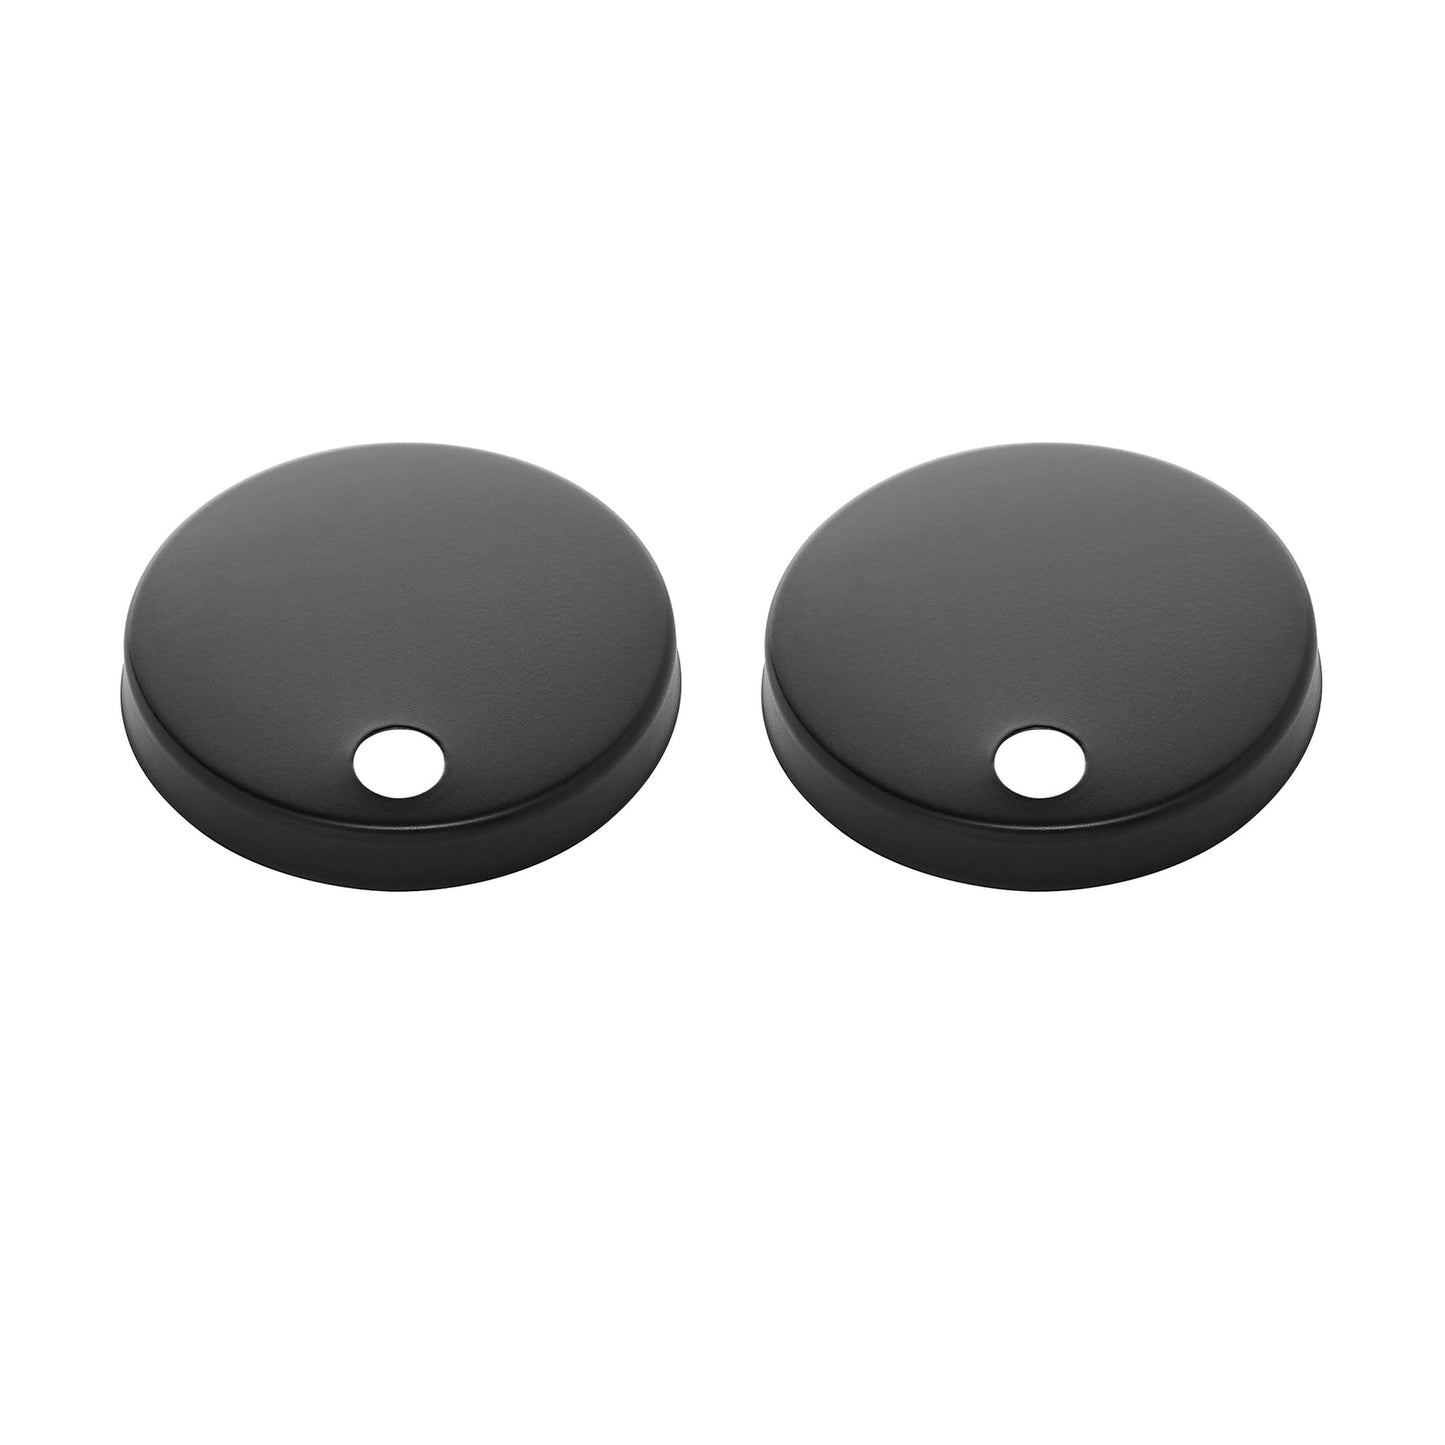 Swiss Madison Round Black Toilet Push Buttons With QQ Feet For SM-1T112